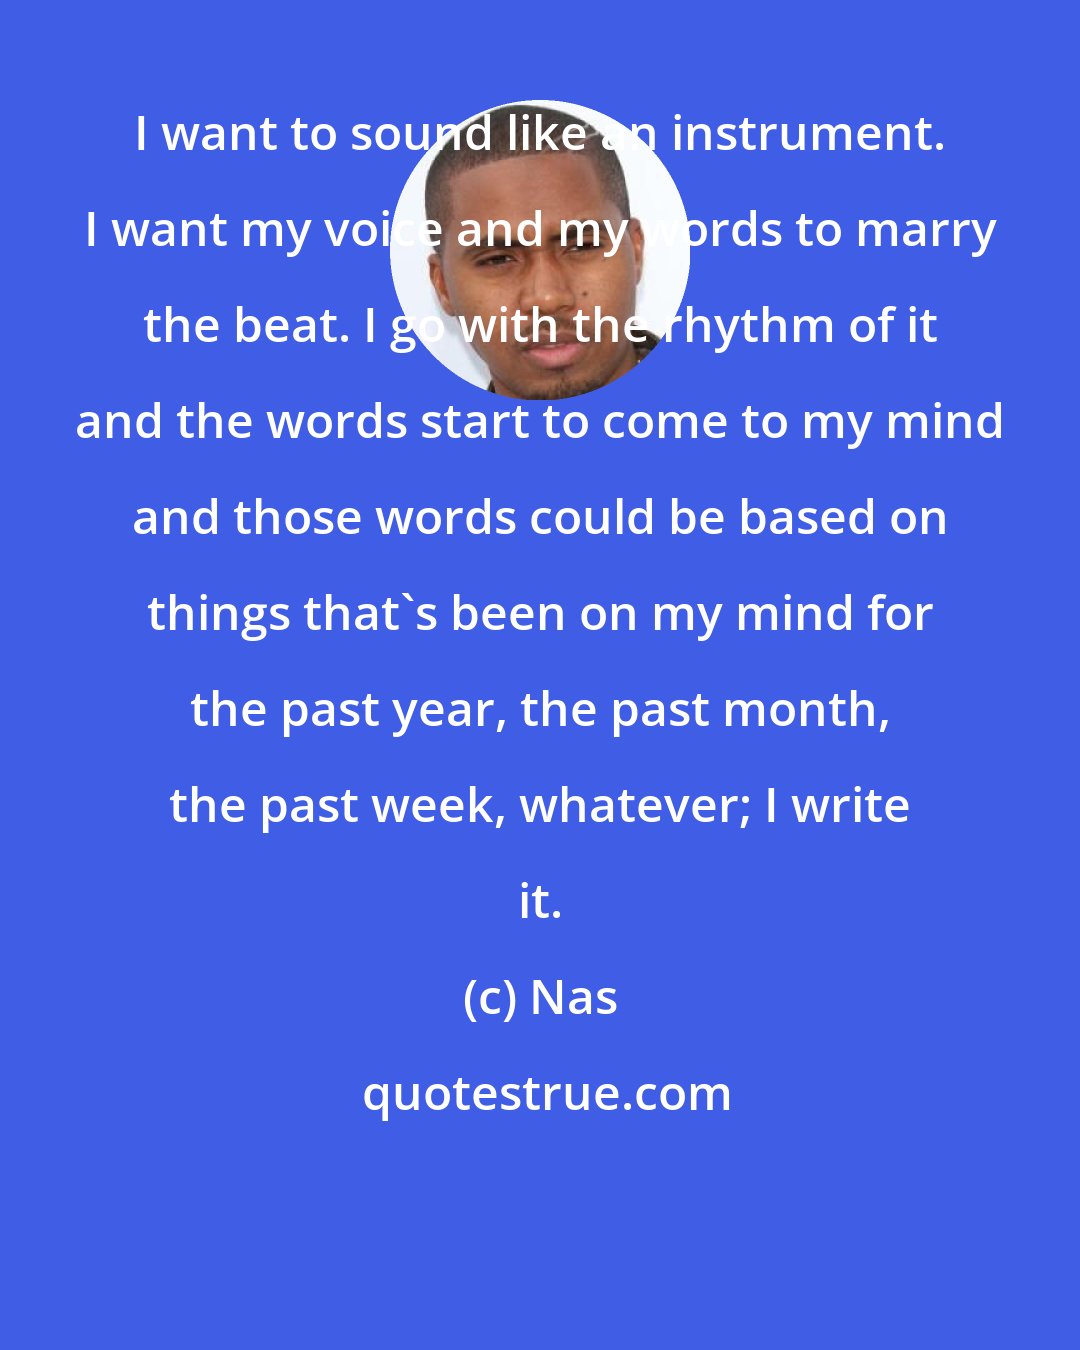 Nas: I want to sound like an instrument. I want my voice and my words to marry the beat. I go with the rhythm of it and the words start to come to my mind and those words could be based on things that's been on my mind for the past year, the past month, the past week, whatever; I write it.